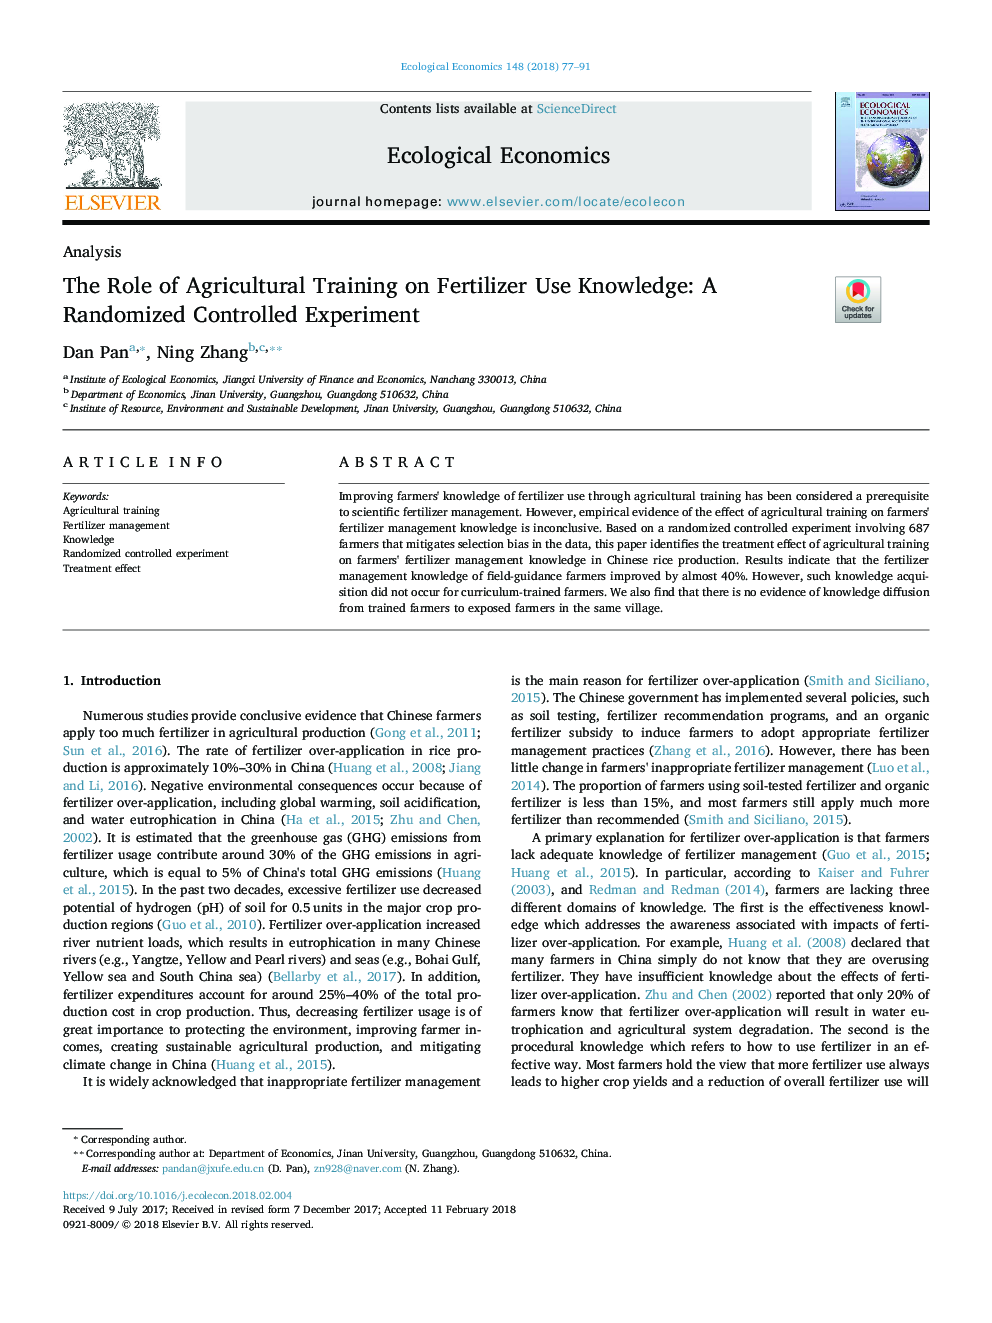 The Role of Agricultural Training on Fertilizer Use Knowledge: A Randomized Controlled Experiment